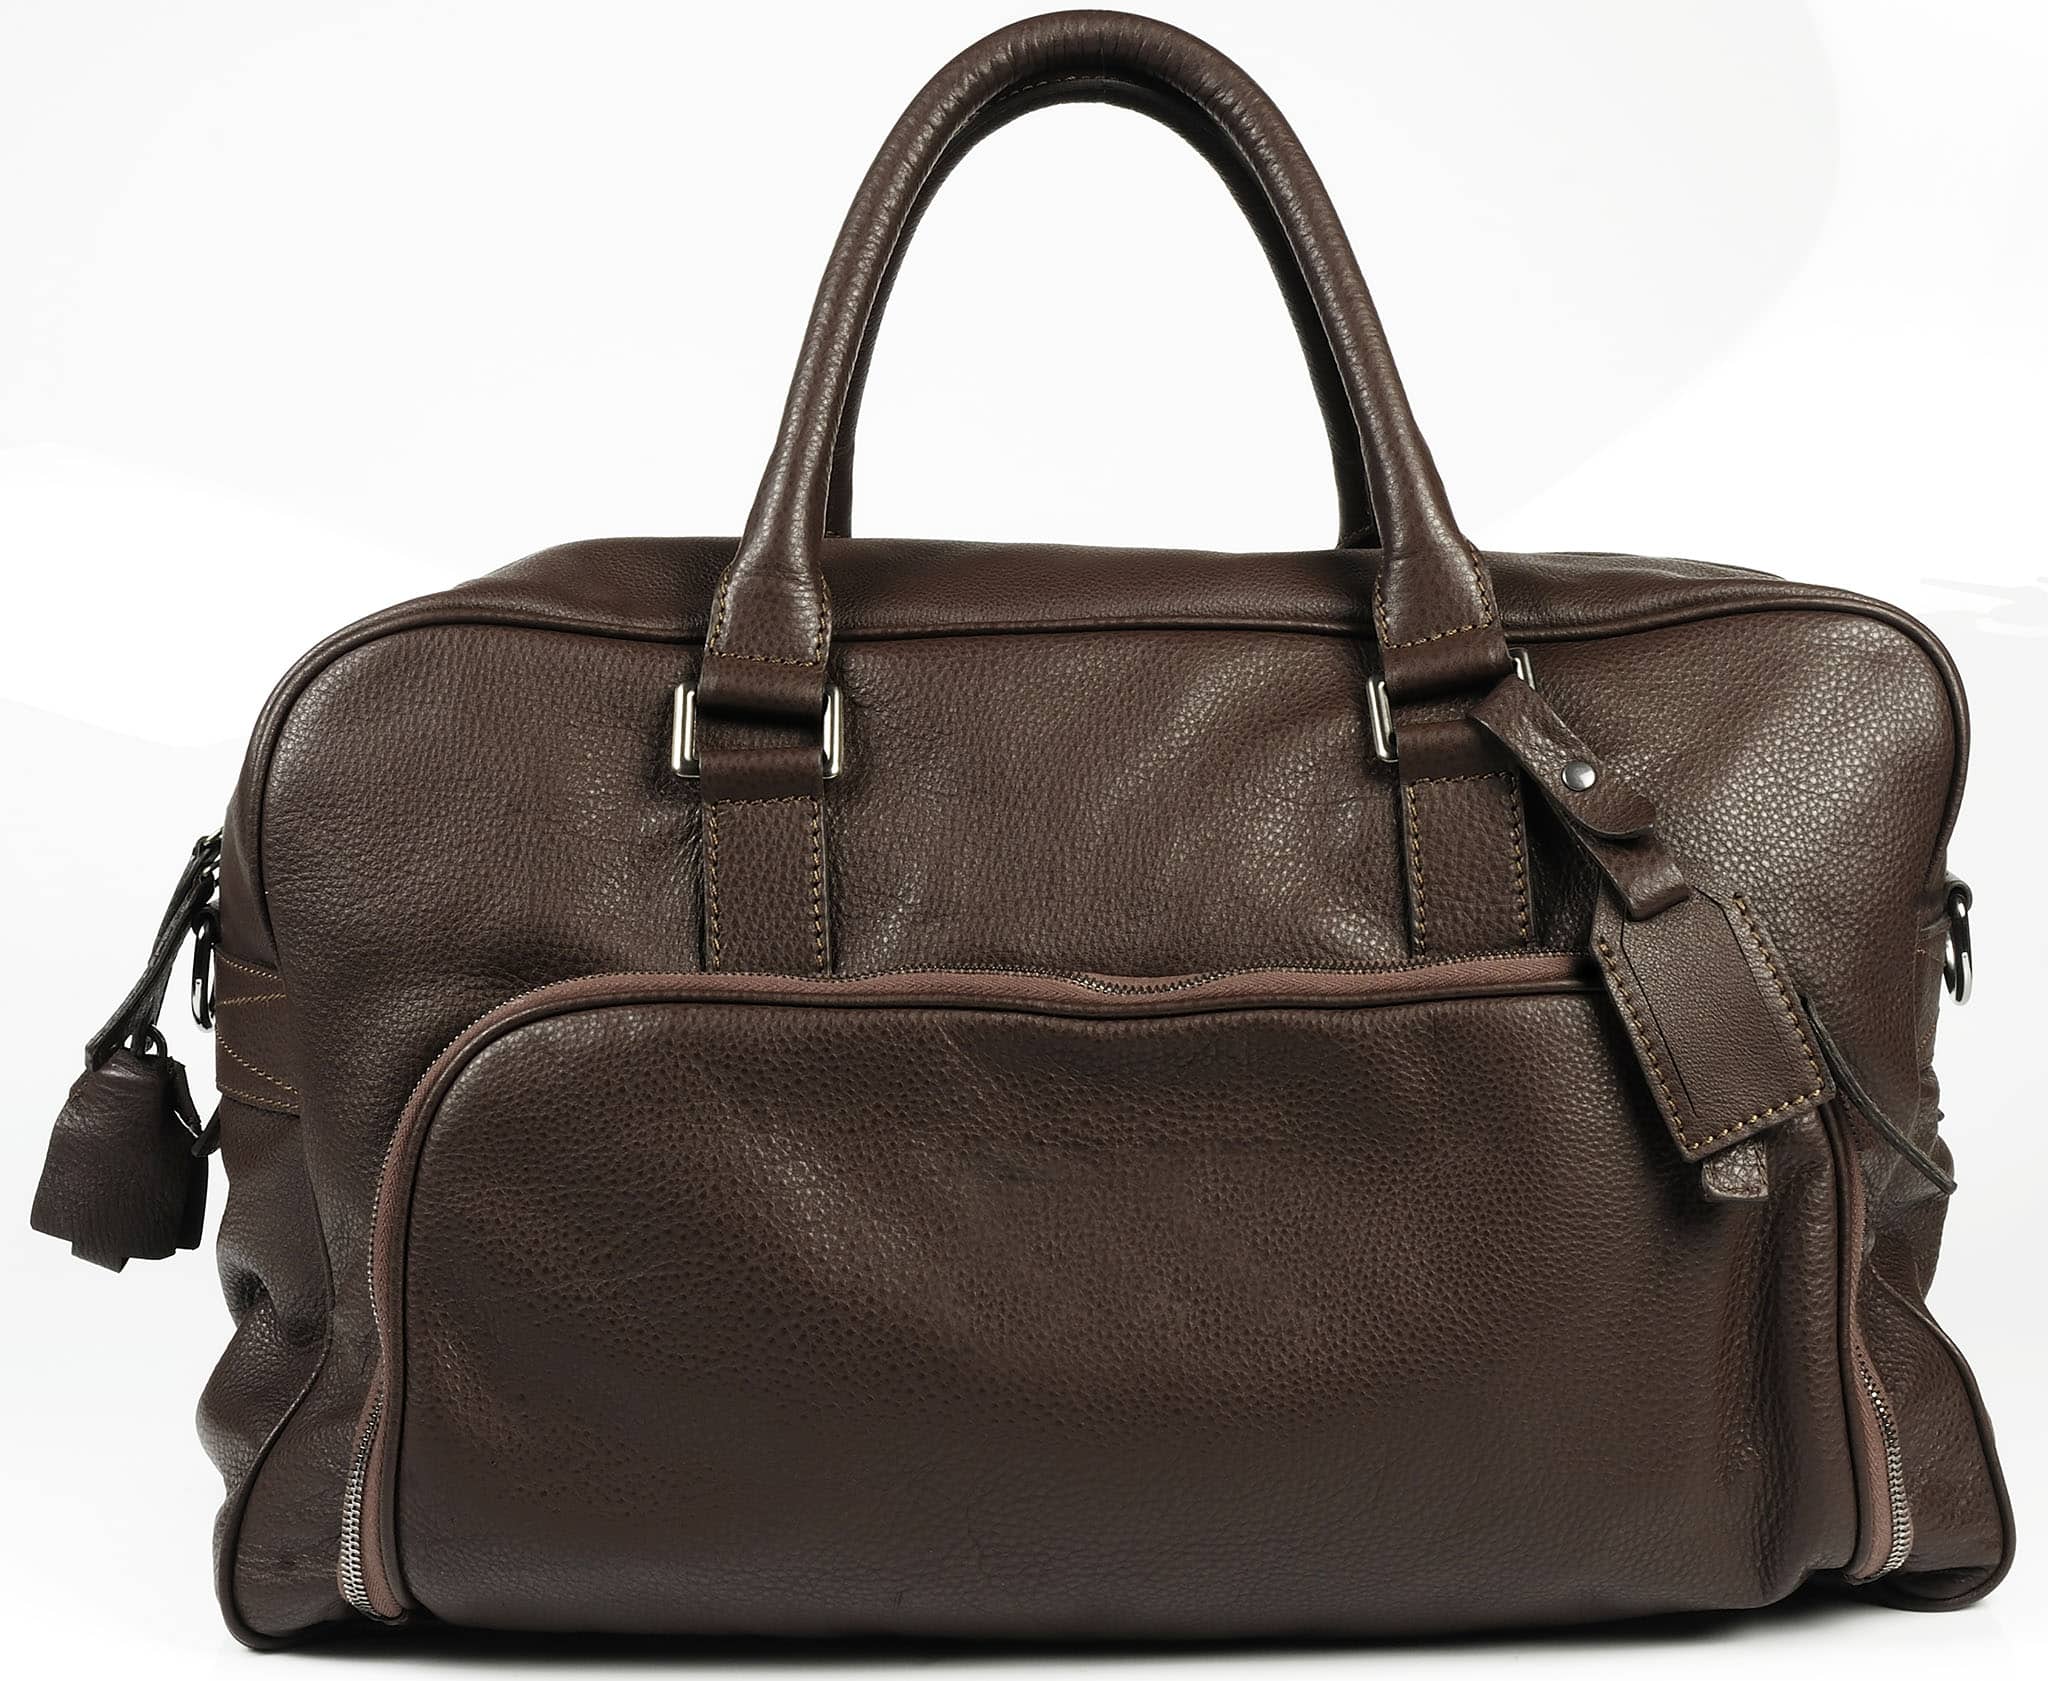 Weekender bags come in a variety of styles, shapes, and sizes and often resemble an extendable tote